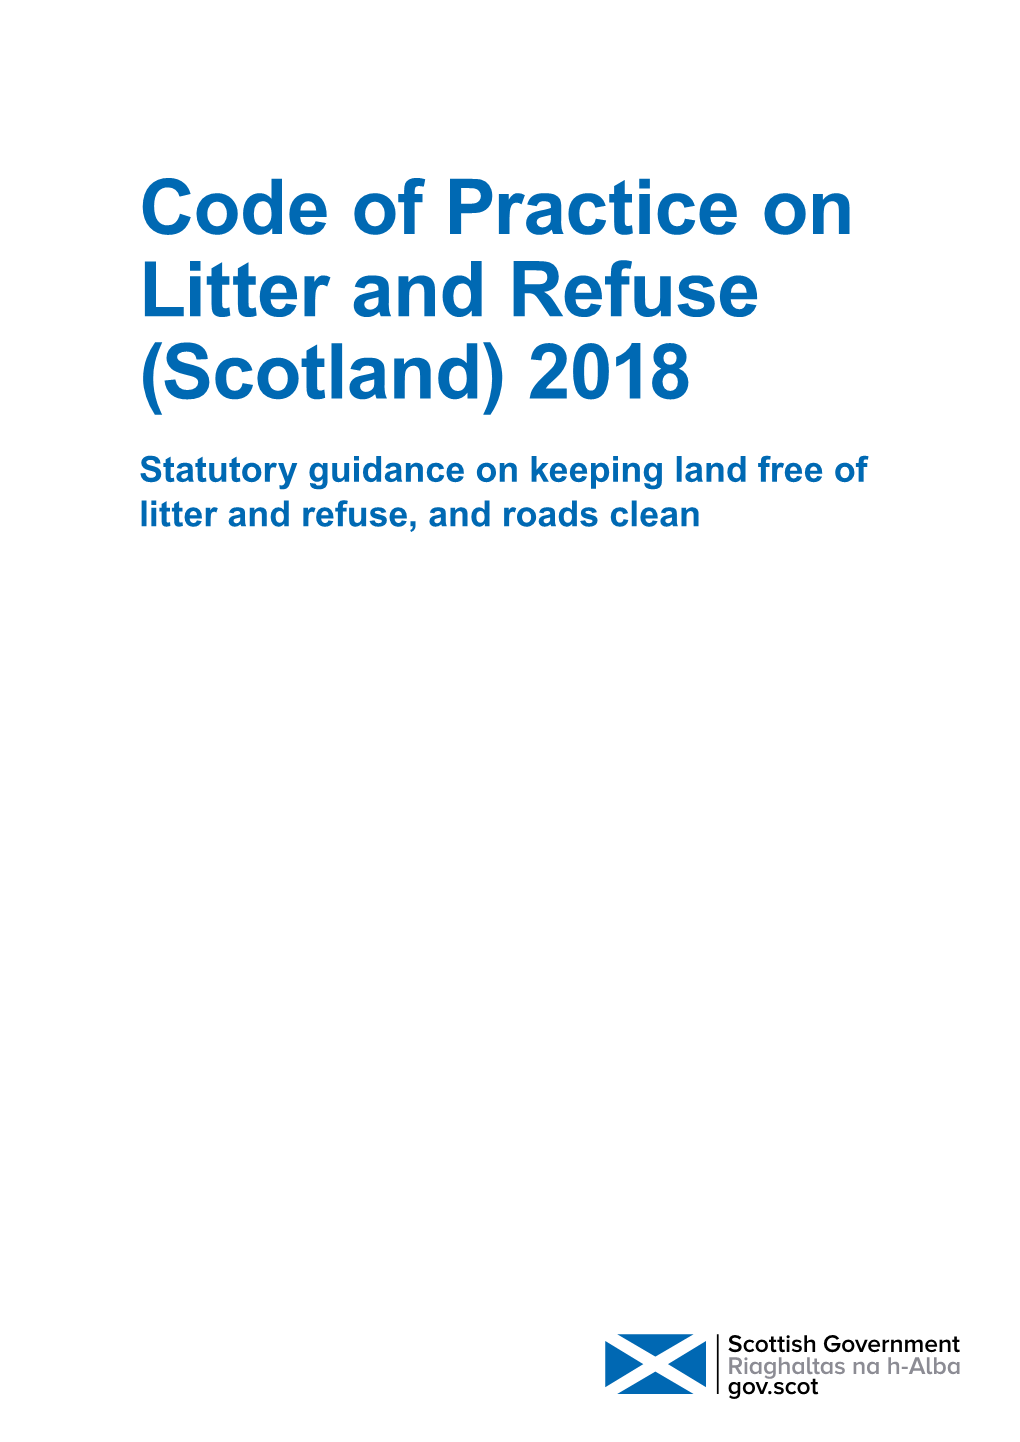 Code of Practice on Litter and Refuse (Scotland) 2018 Statutory Guidance on Keeping Land Free of Litter and Refuse, and Roads Clean